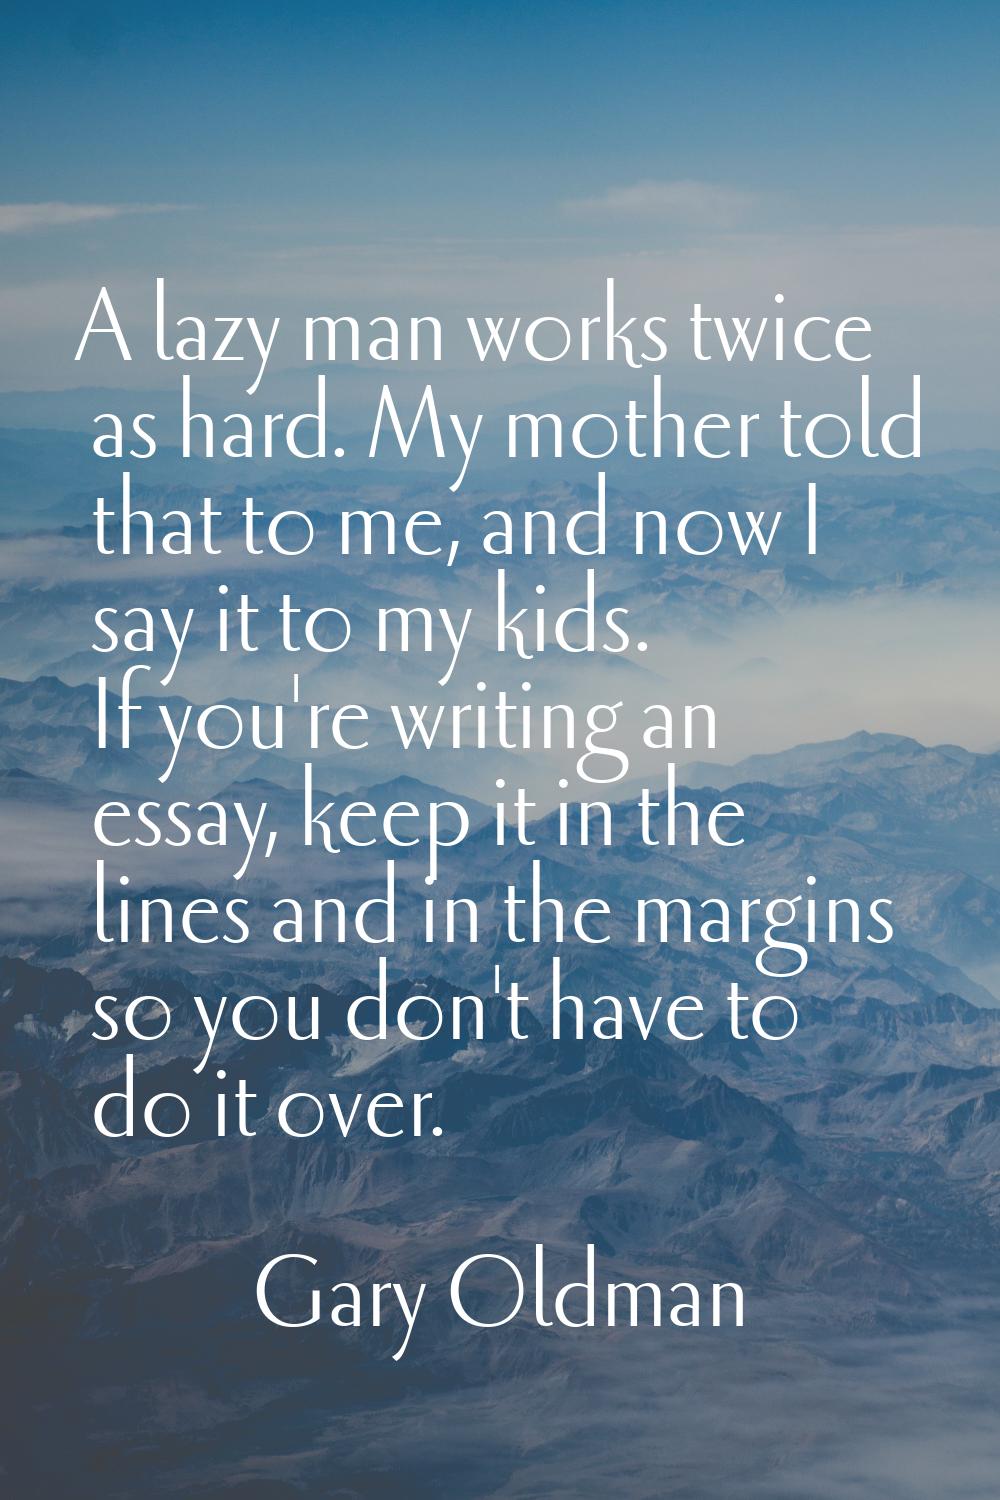 A lazy man works twice as hard. My mother told that to me, and now I say it to my kids. If you're w